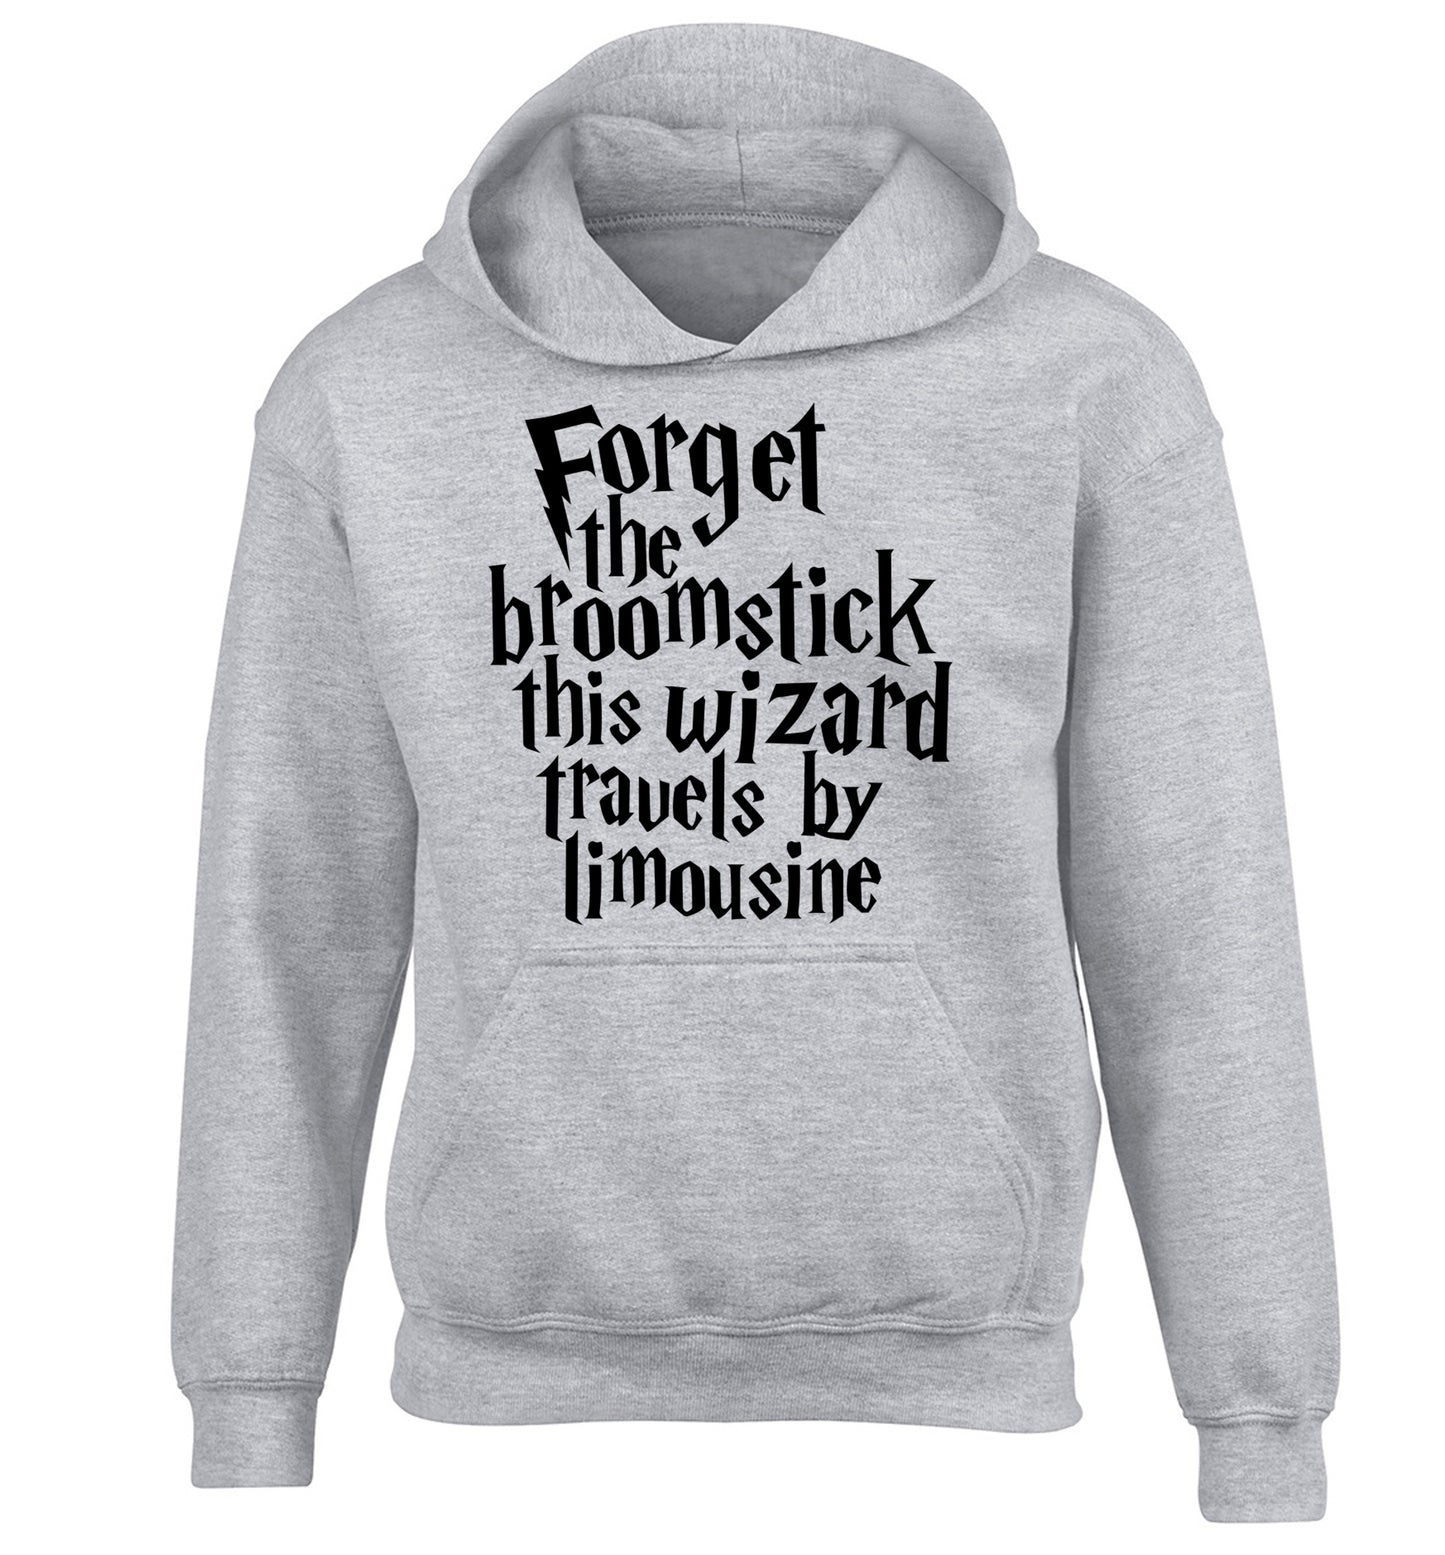 Forget the broomstick this wizard travels by limousine children's grey hoodie 12-14 Years